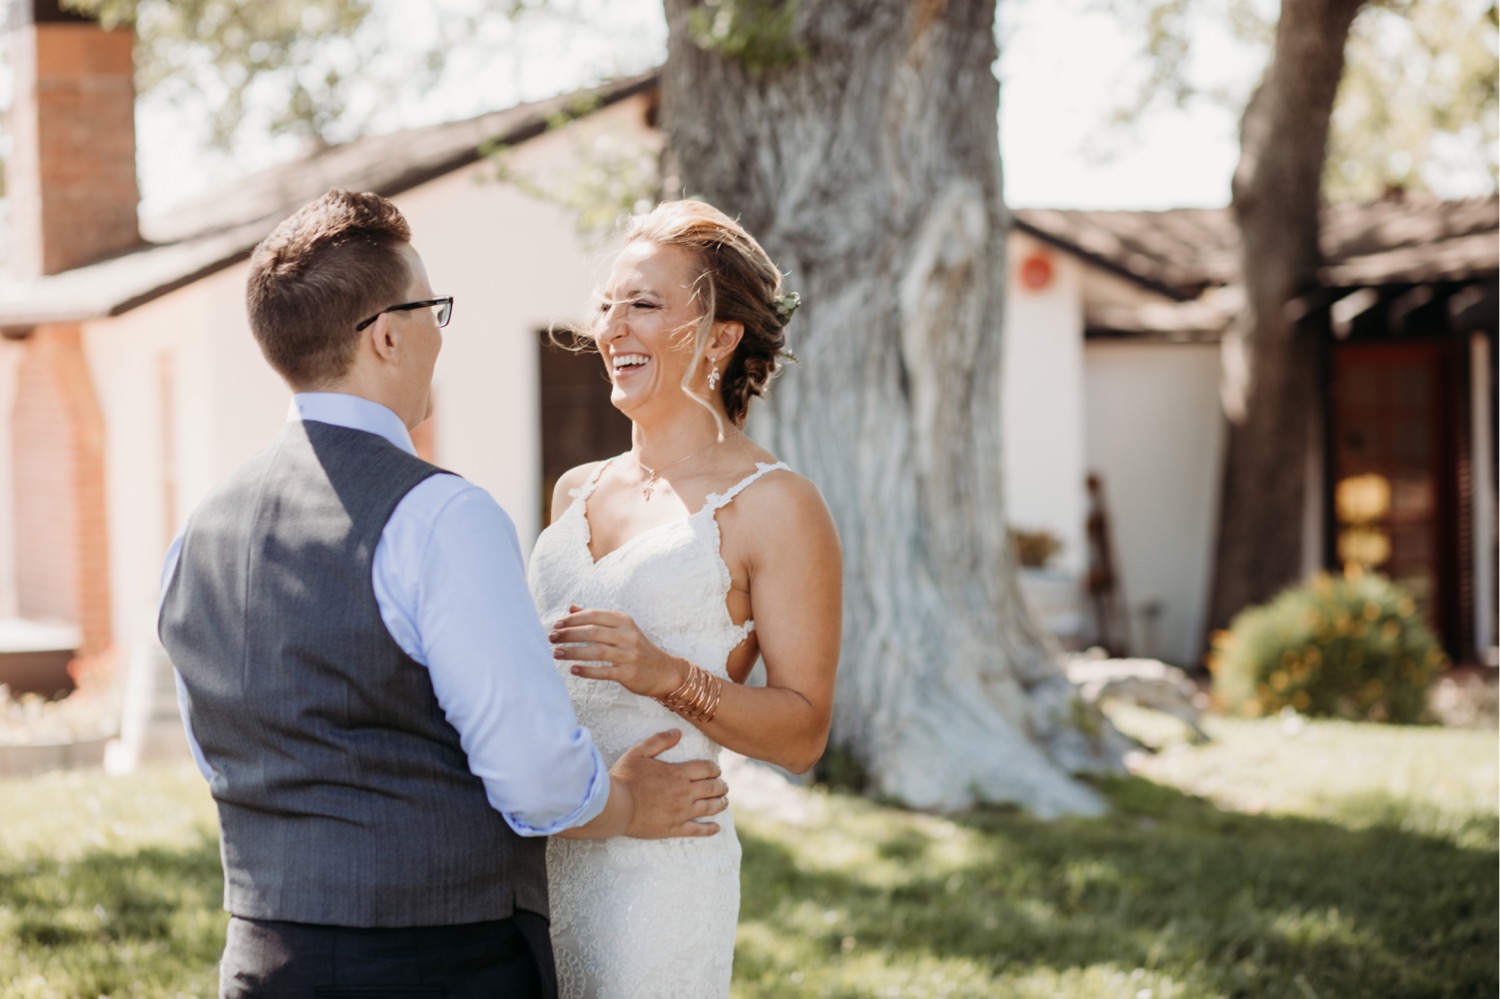 Brides laugh and smile at each other before they get married. Liz Koston Photography.